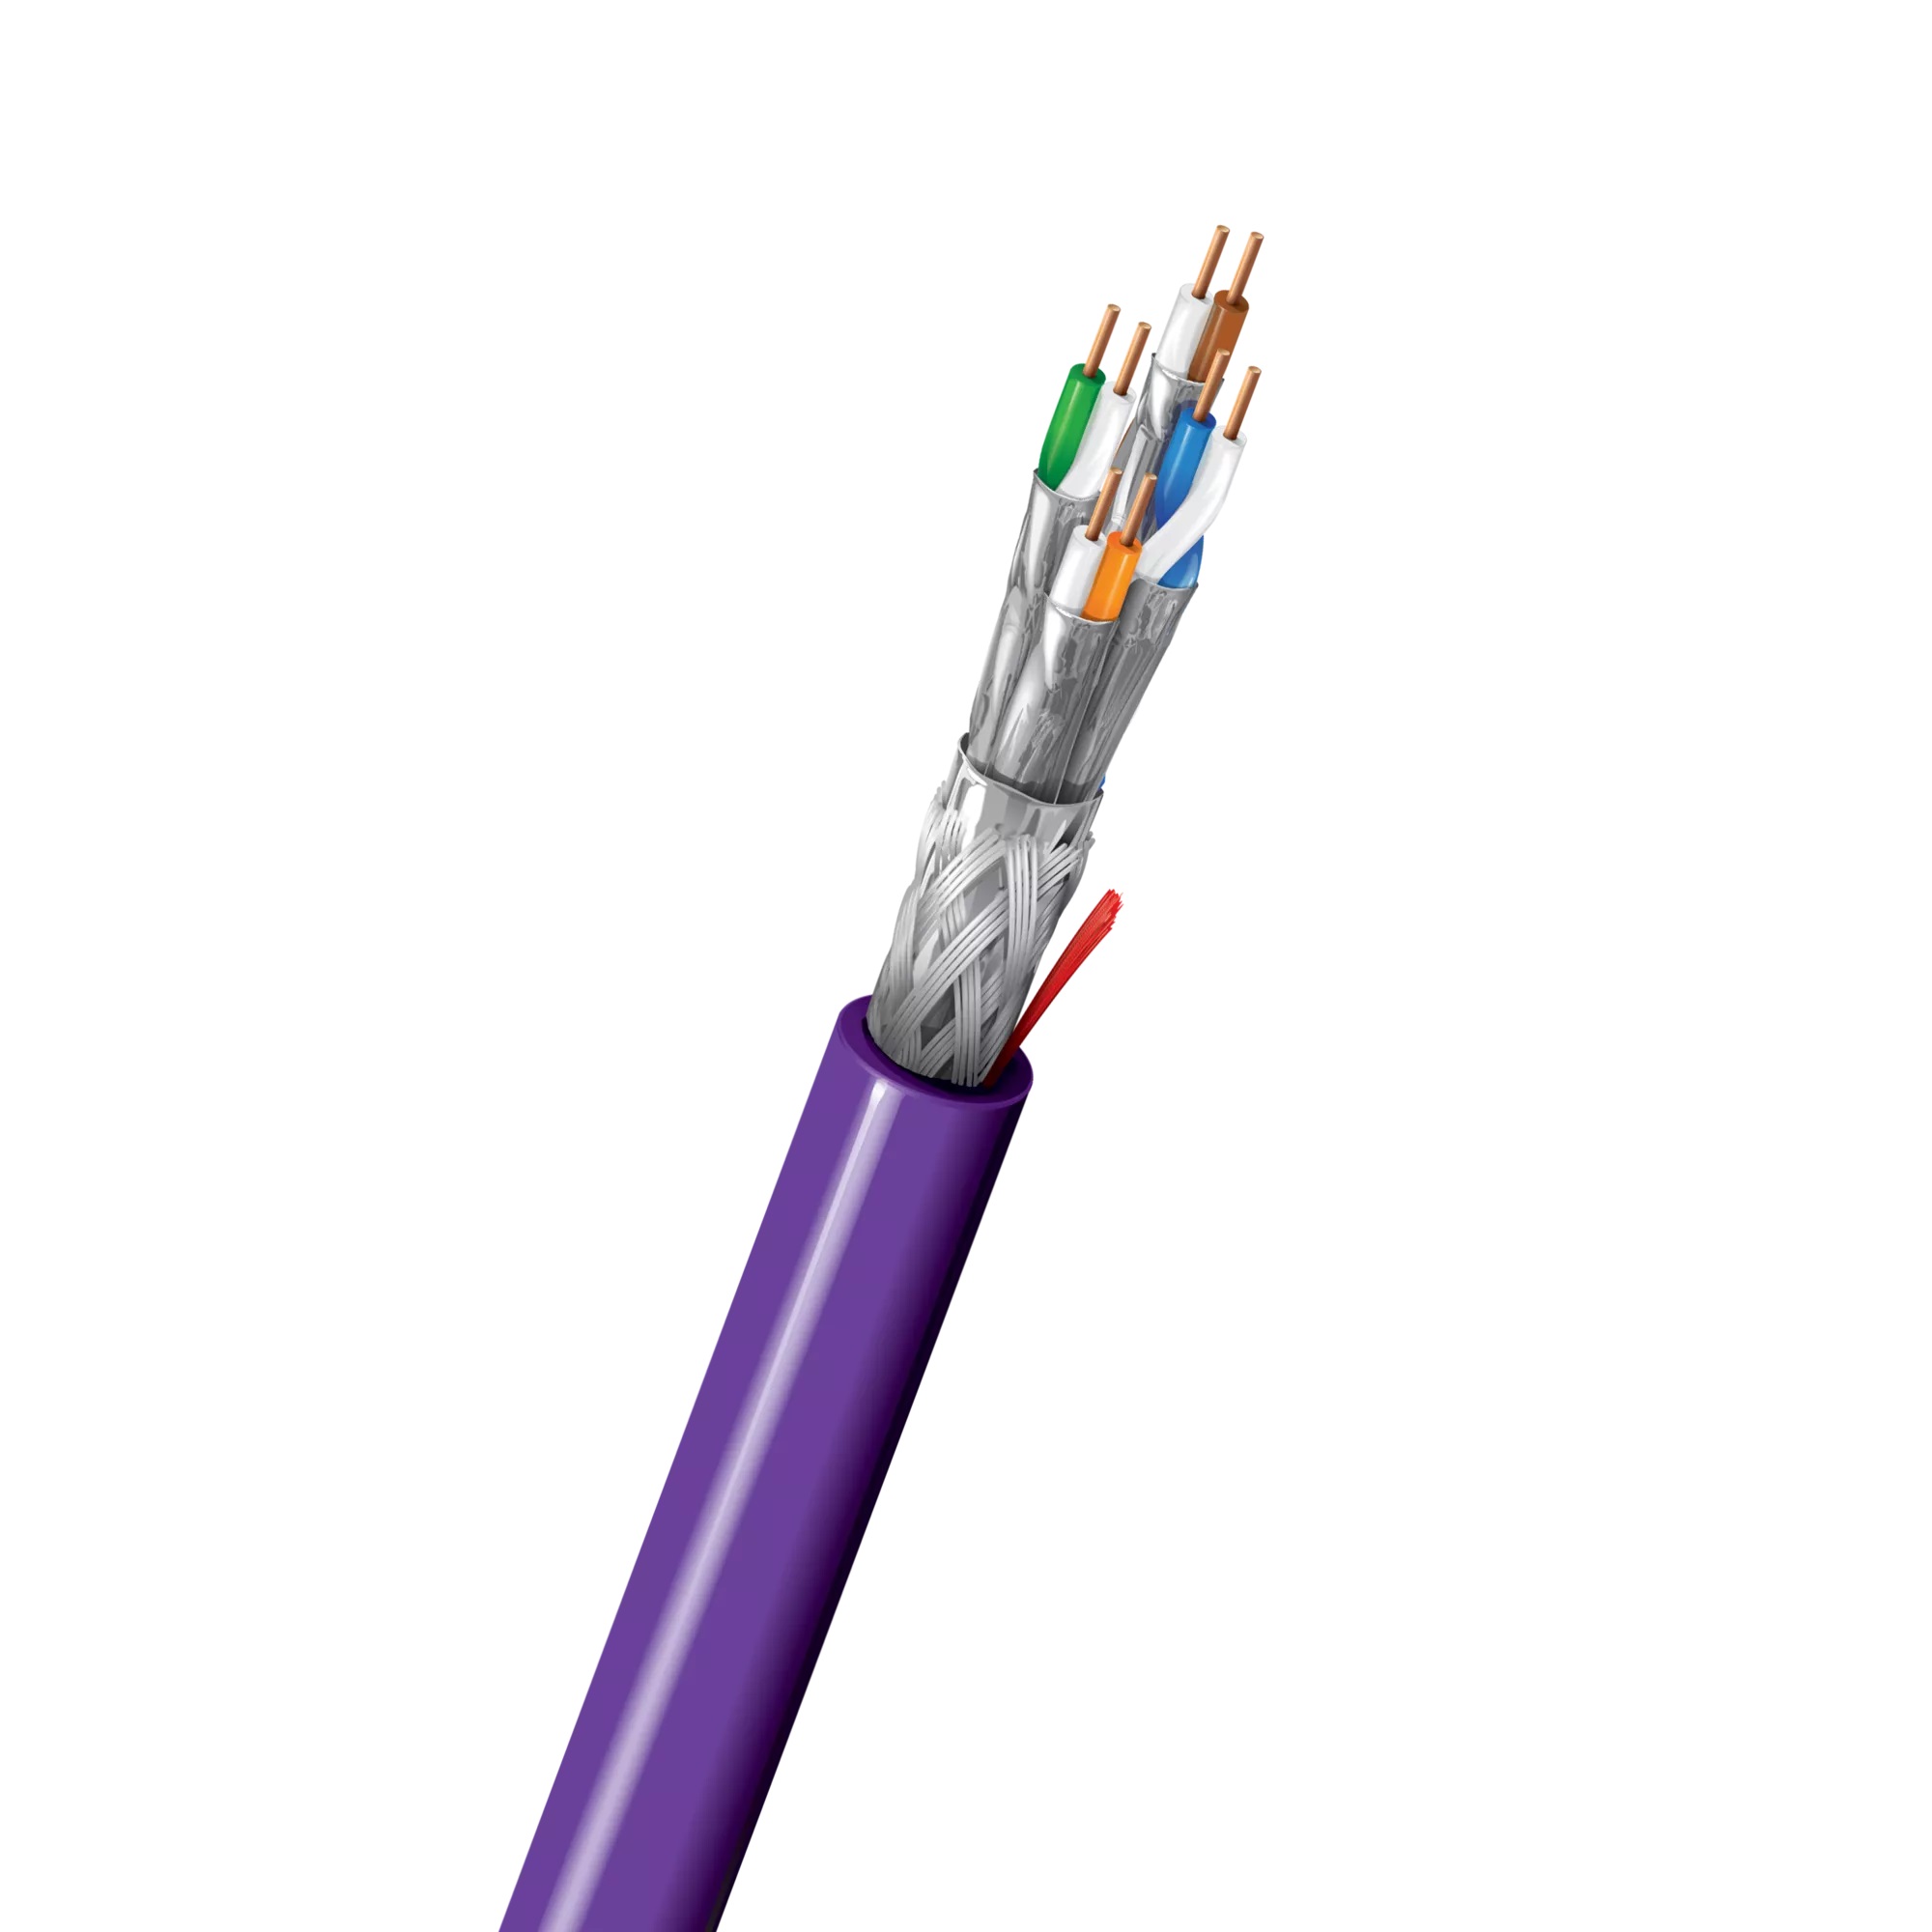 Aston Cable's Superior Cat7 Cables: The Key to High-Speed Ethernet Networks